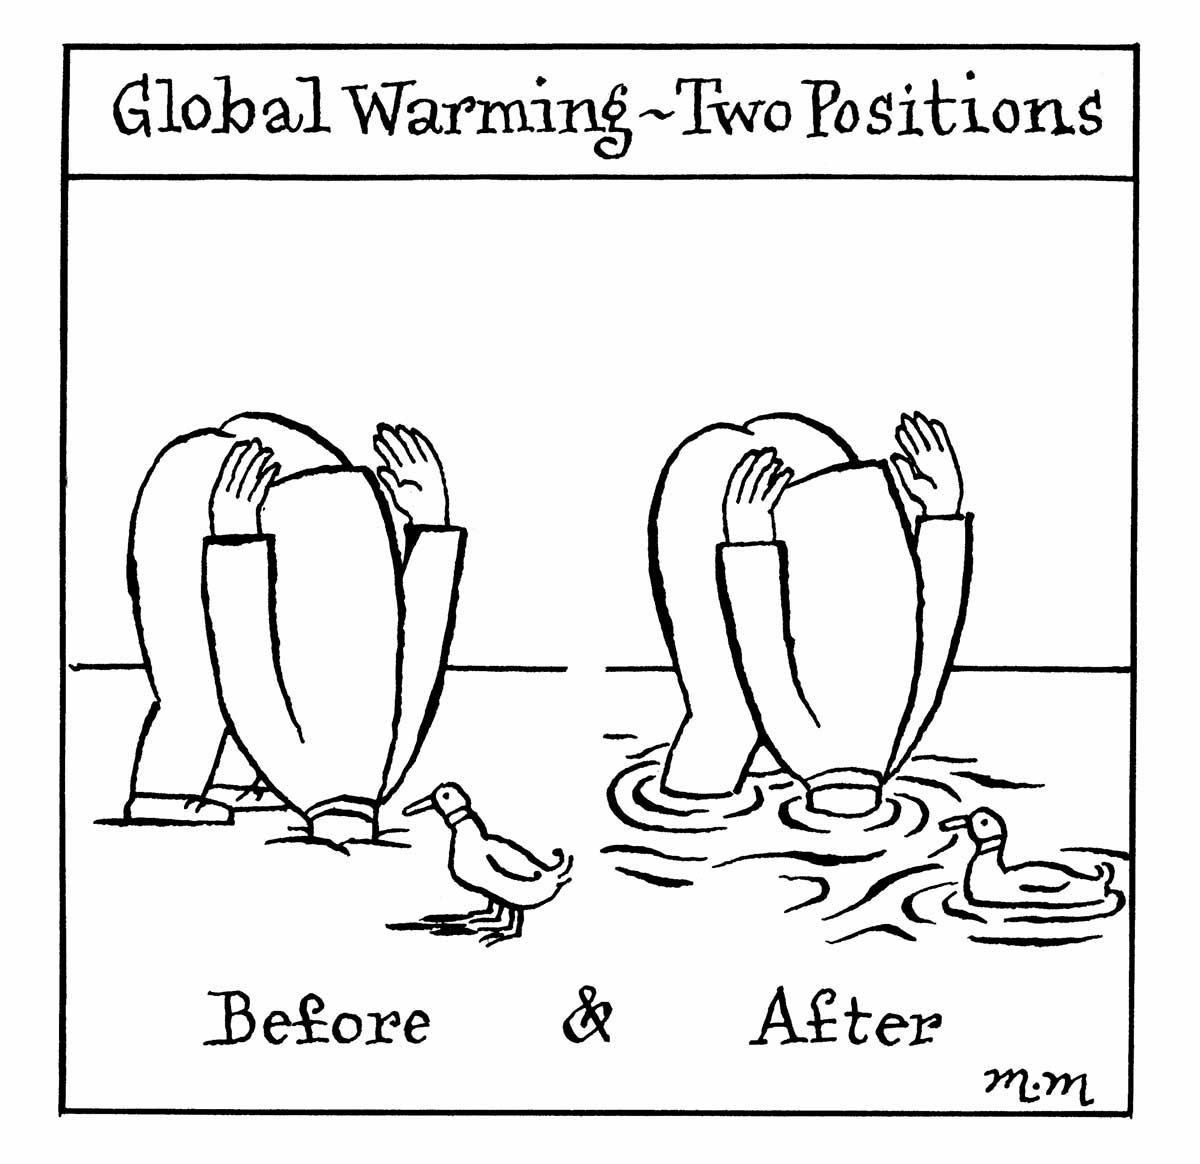 Political cartoon depicting two people, both bent over with their heads obscured. The person on the left has their head buried in soil. A duck looks at the person. Under the person and the duck is written 'Before'. The person on the right, most likely the same person, has their head submerged in water. The duck is seen again, however this time it's floating on the water's surface. Under the person and the duck is written 'After'. At the top of the cartoon is written 'Global Warming – Two Positions'. - click to view larger image